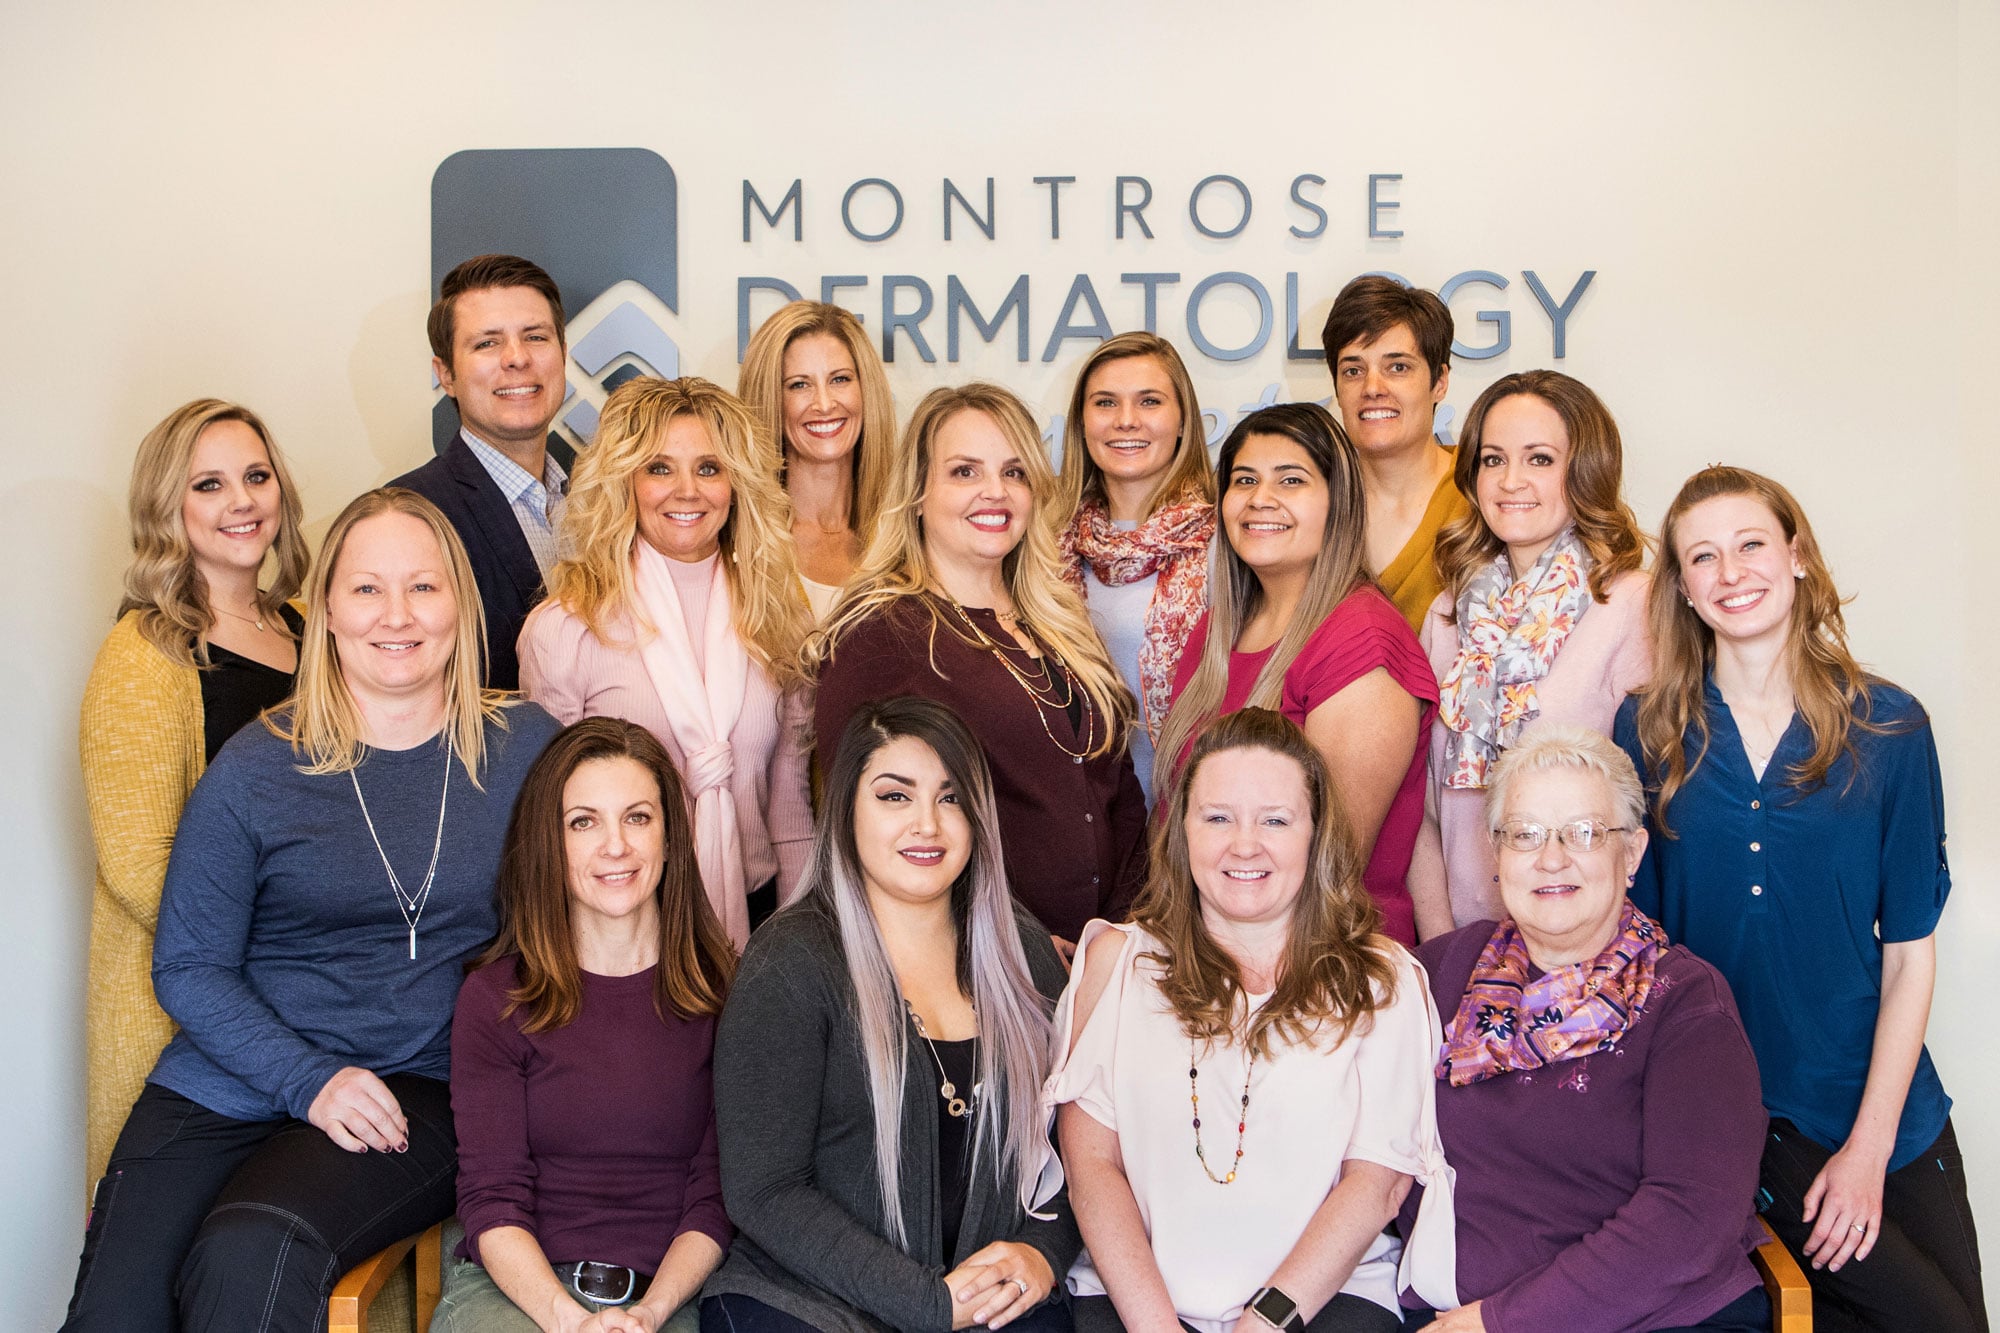 The Montrose Dermatology and Cosmetics team is dedicated to helping you get the skin you seek.